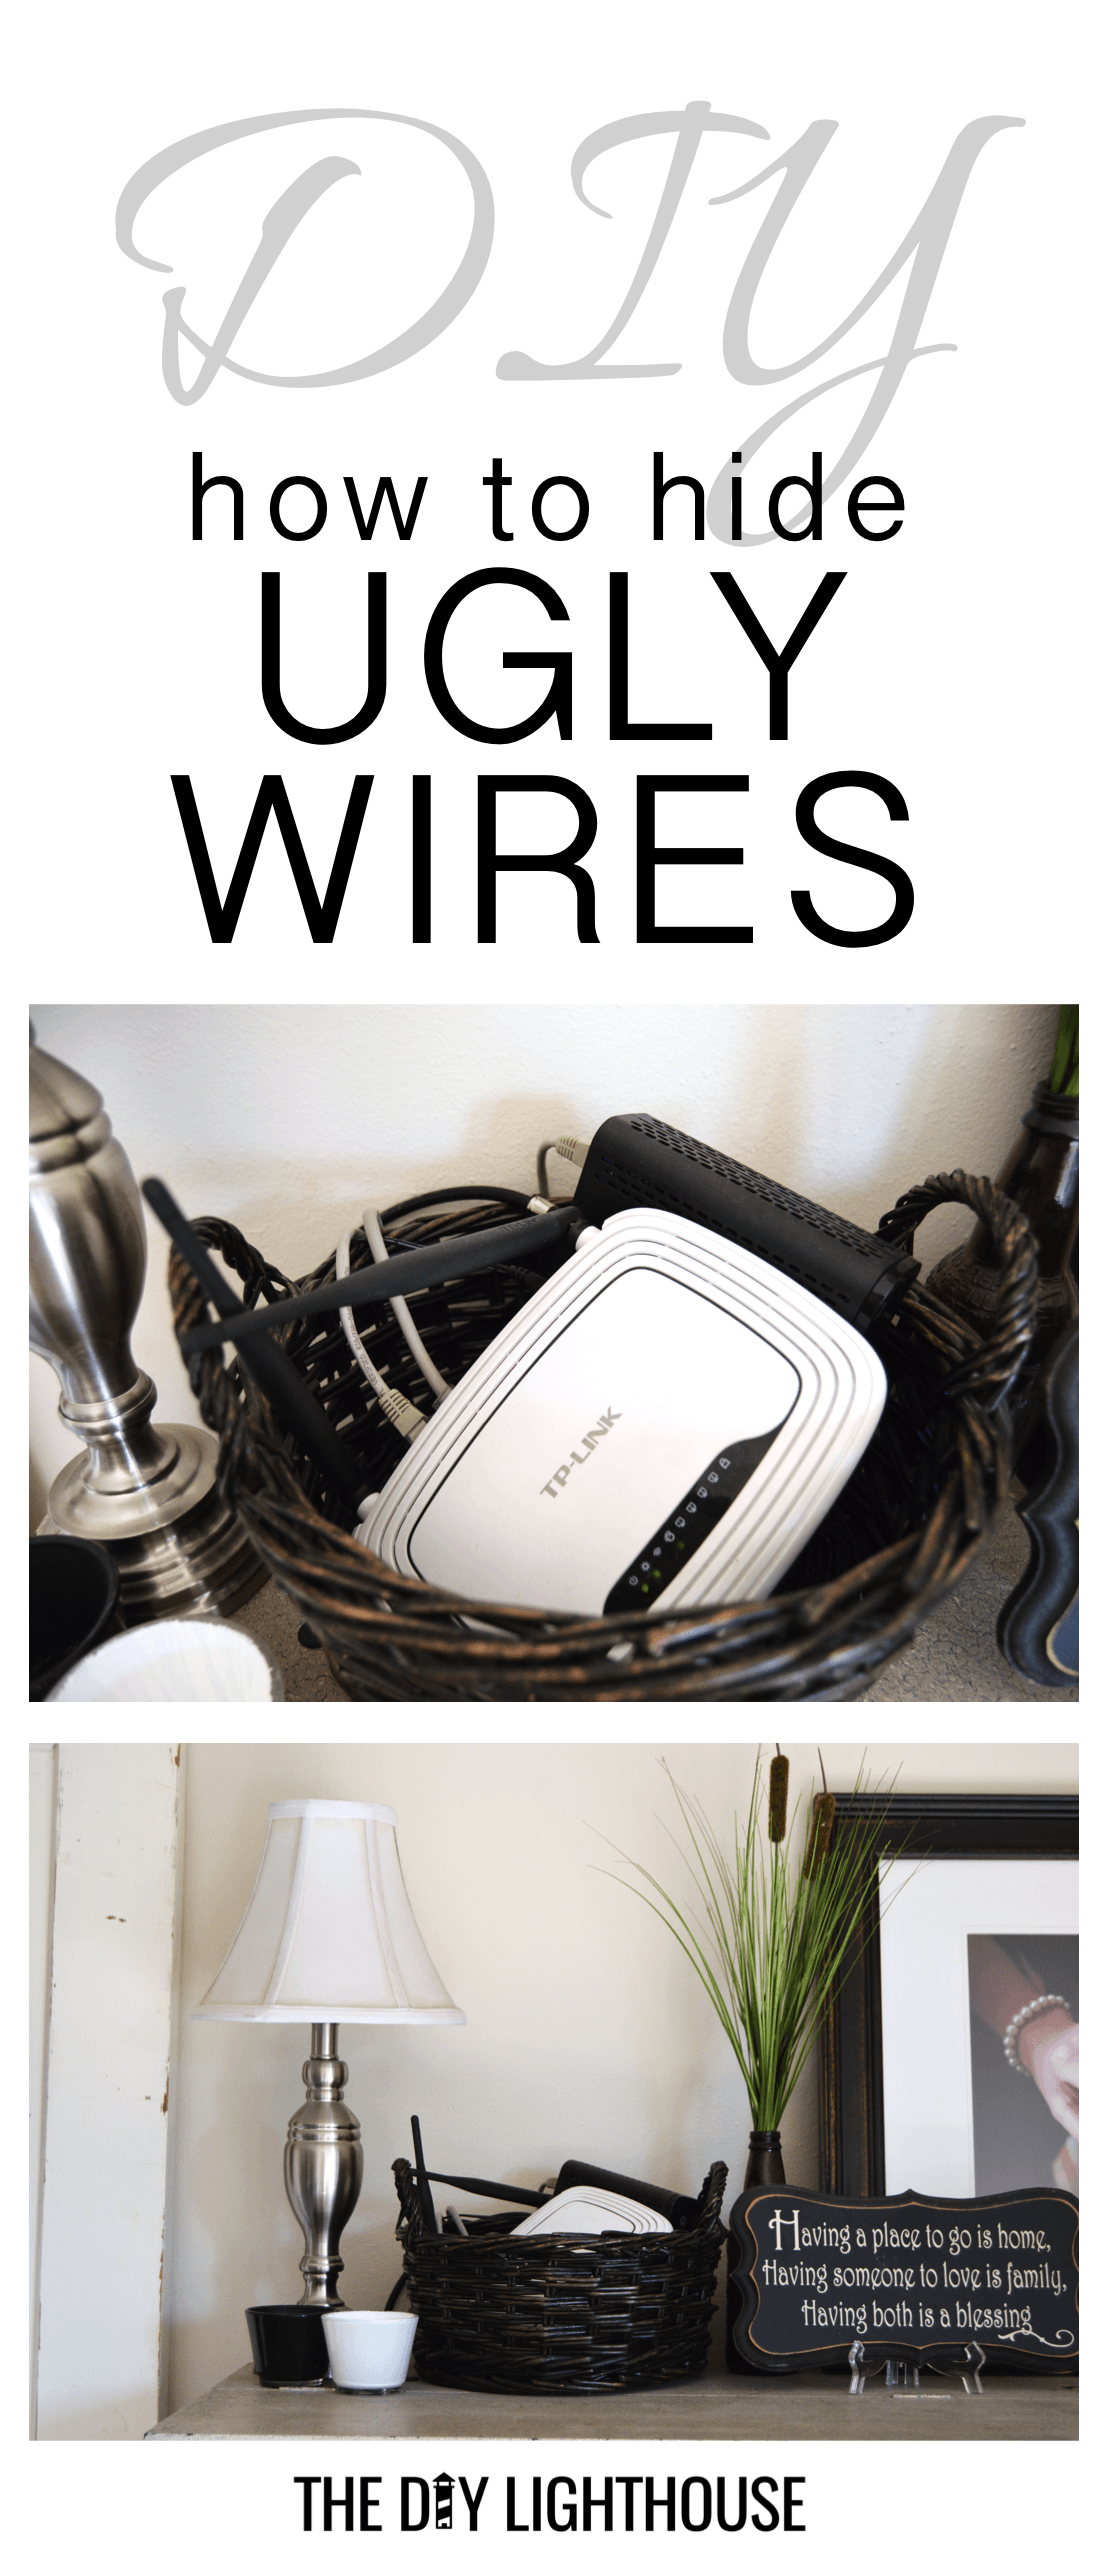 11 Ingenious Hacks For Hiding Ugly Wires In Plain Sight